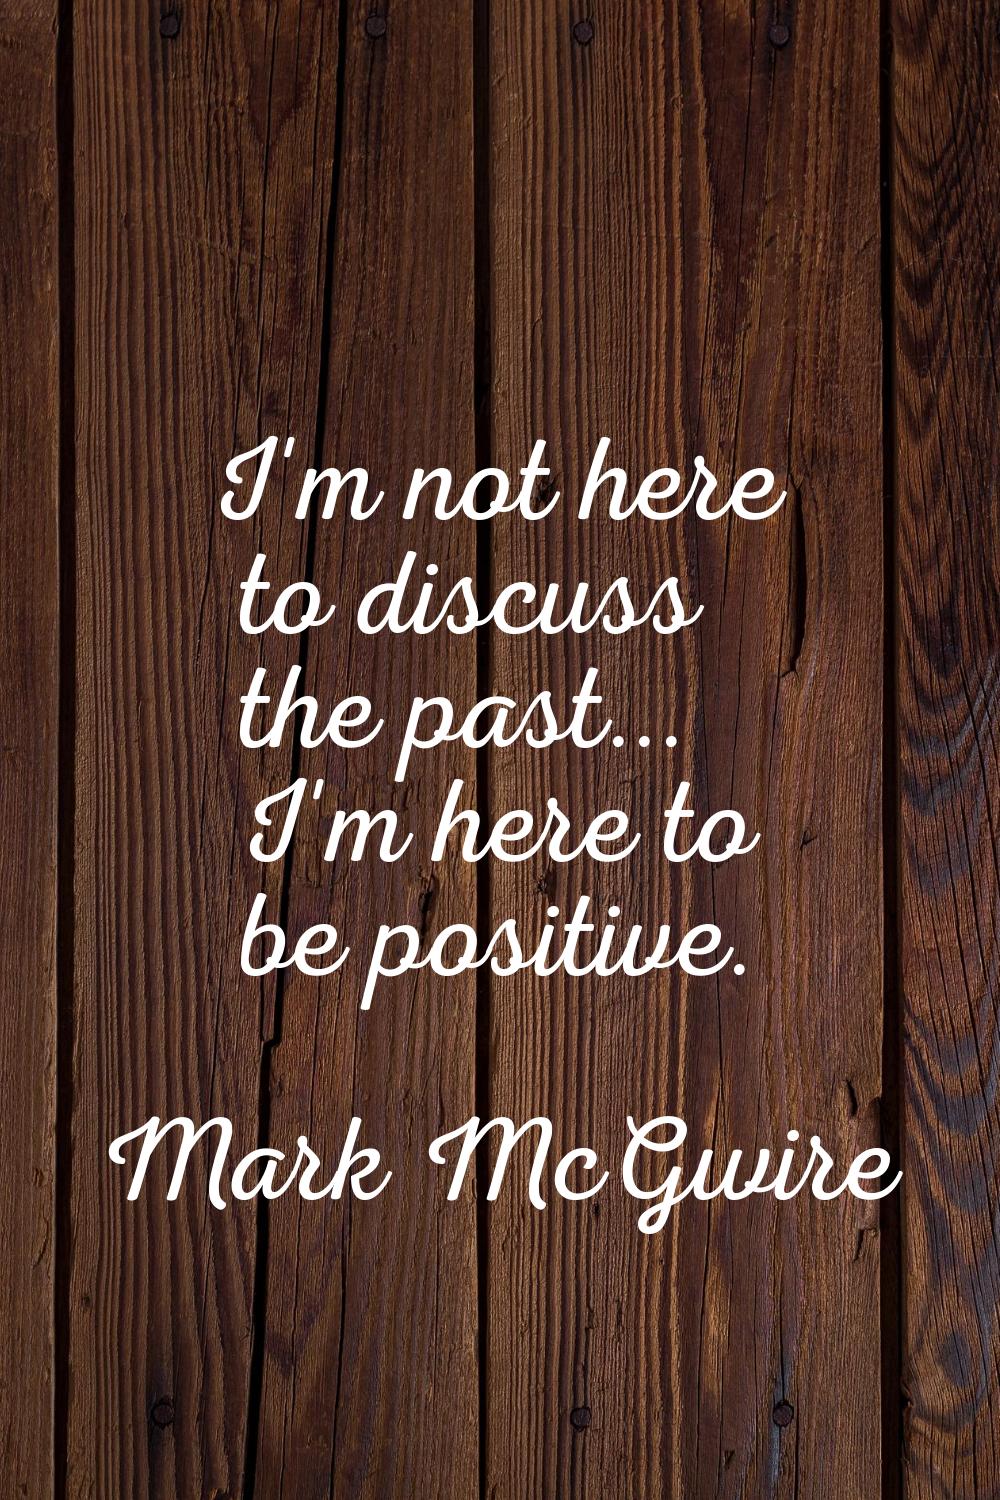 I'm not here to discuss the past... I'm here to be positive.